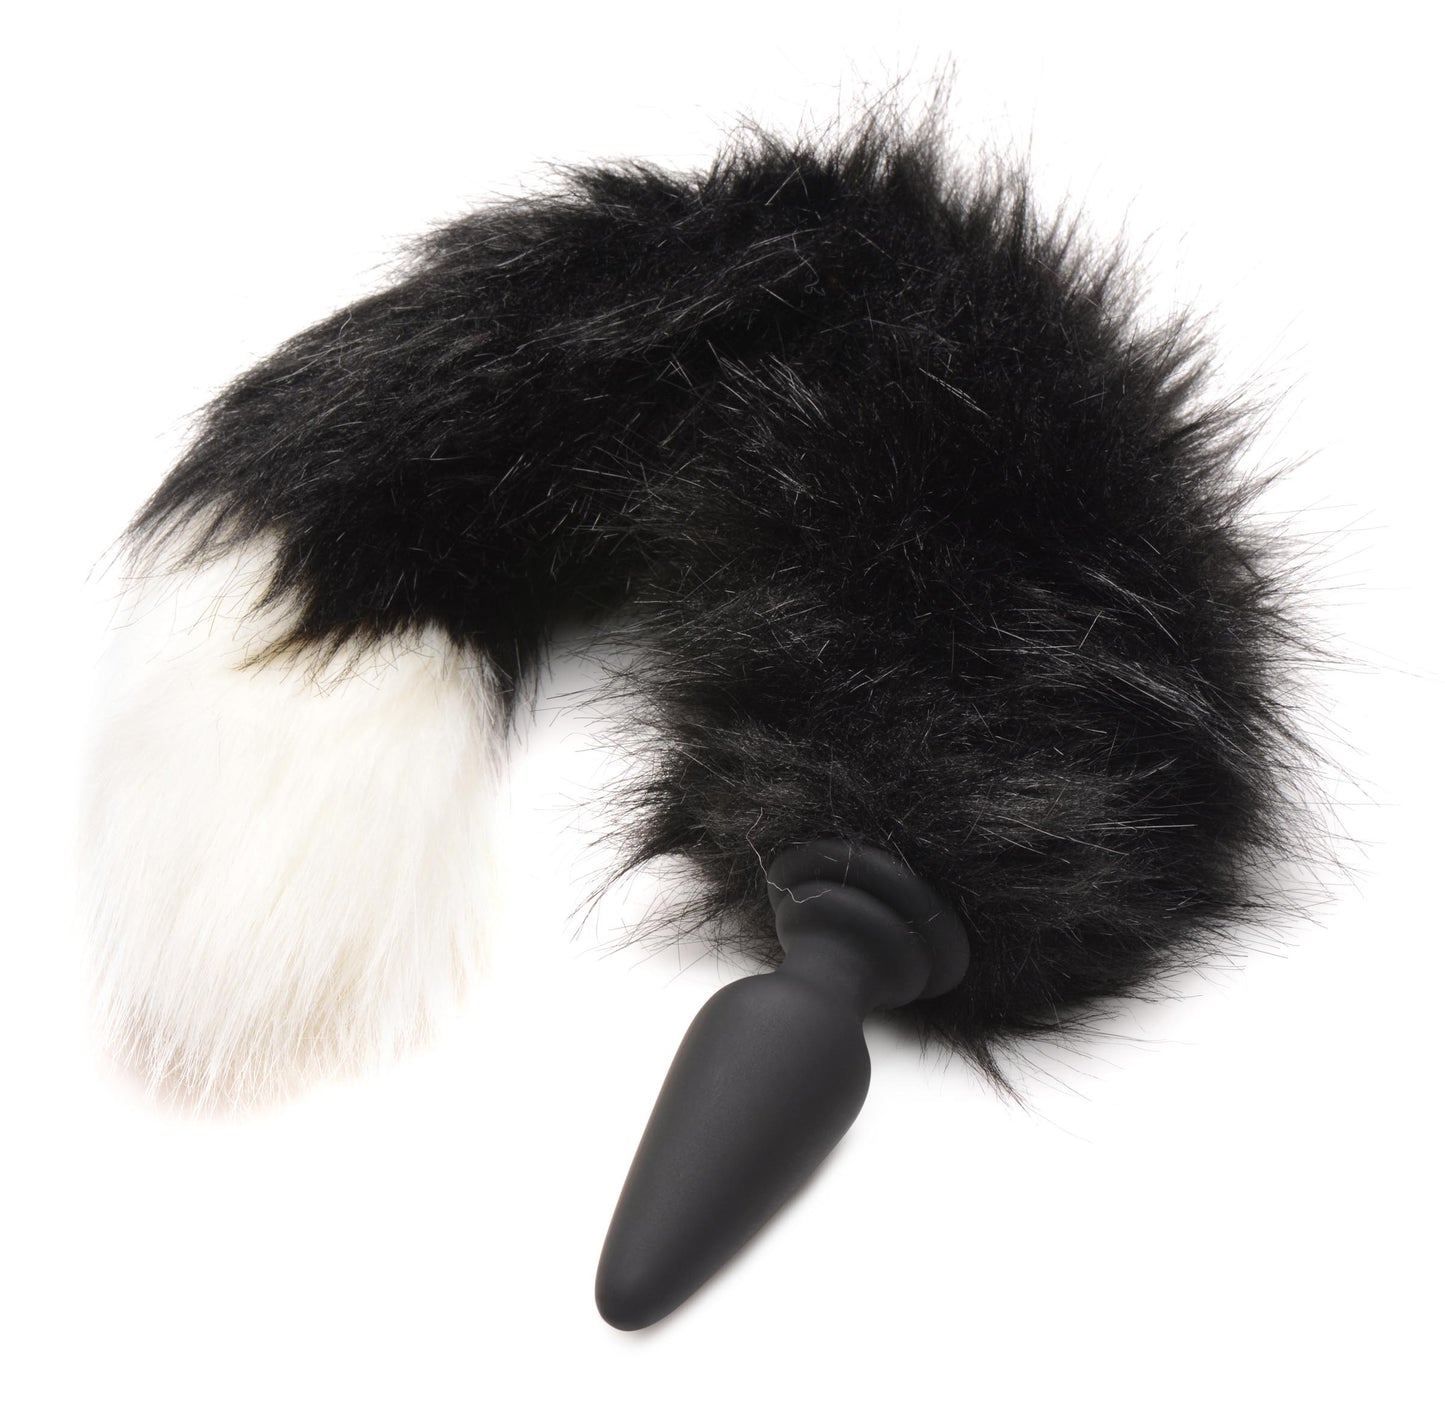 Small Anal Plug with Interchangeable Fox Tail - Black and White - UABDSM